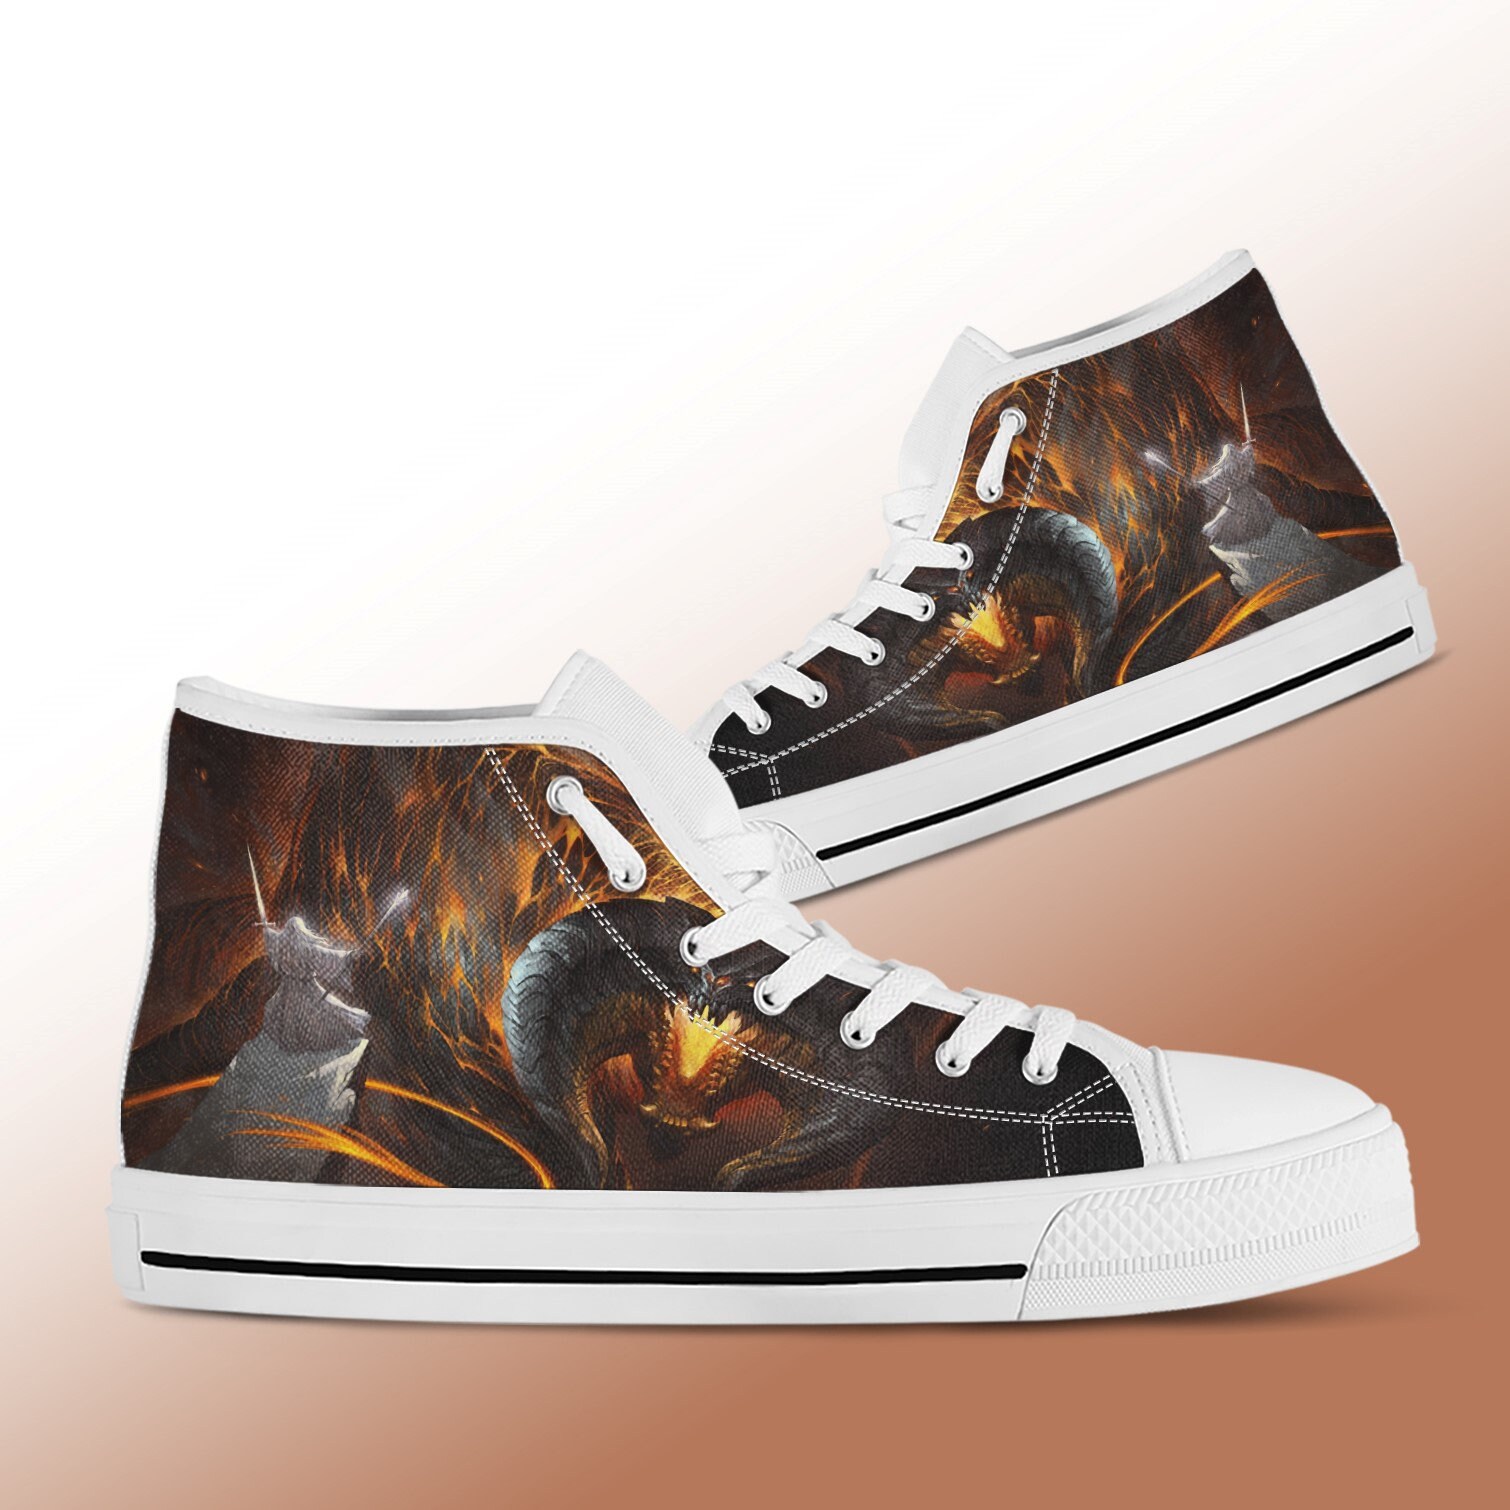 Lord of the Rings Shoes Gandalf Lotr High Top Sneakers. - Etsy